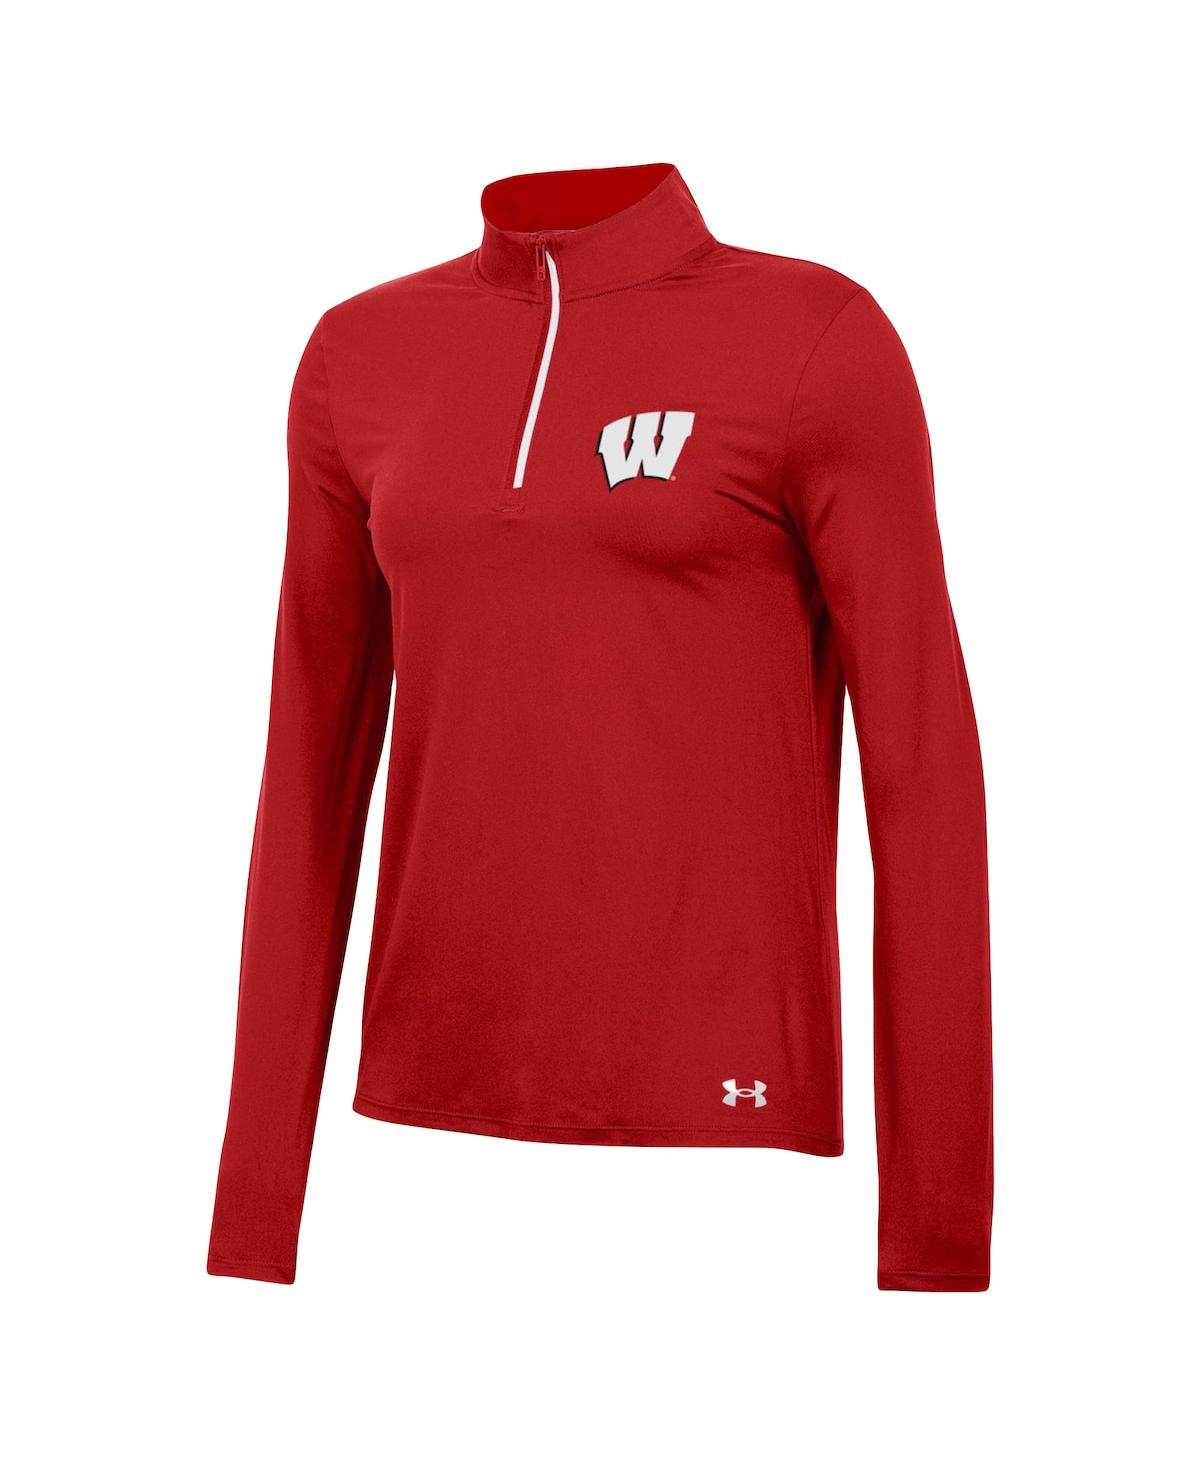 Shop Under Armour Women's  Red Wisconsin Badgers Gameday Knockout Quarter-zip Top